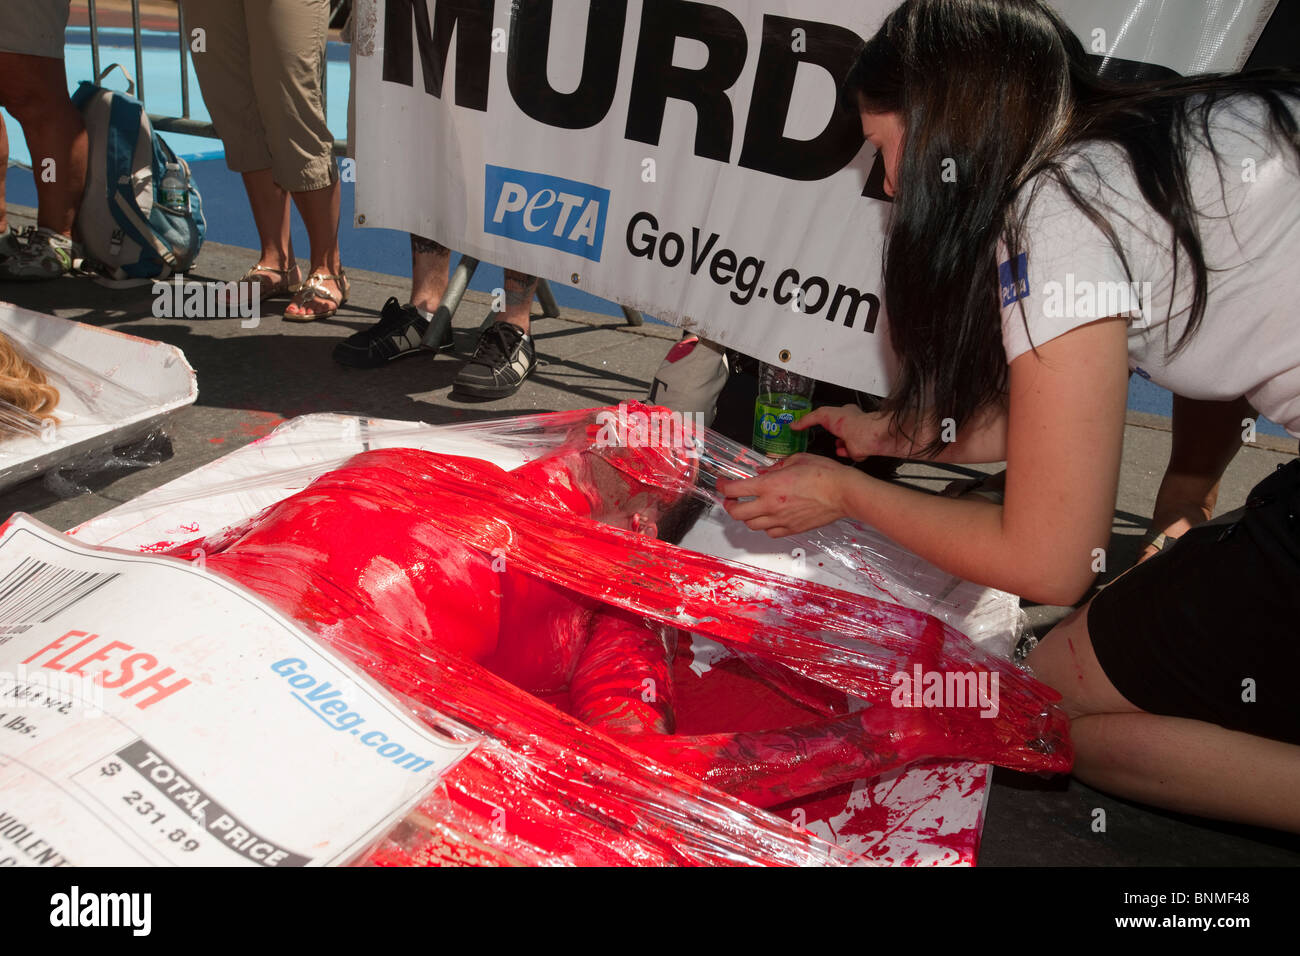 Activists from the animal rights group PETA protest the slaughter of animals in the production of meat in Times Square in NY Stock Photo